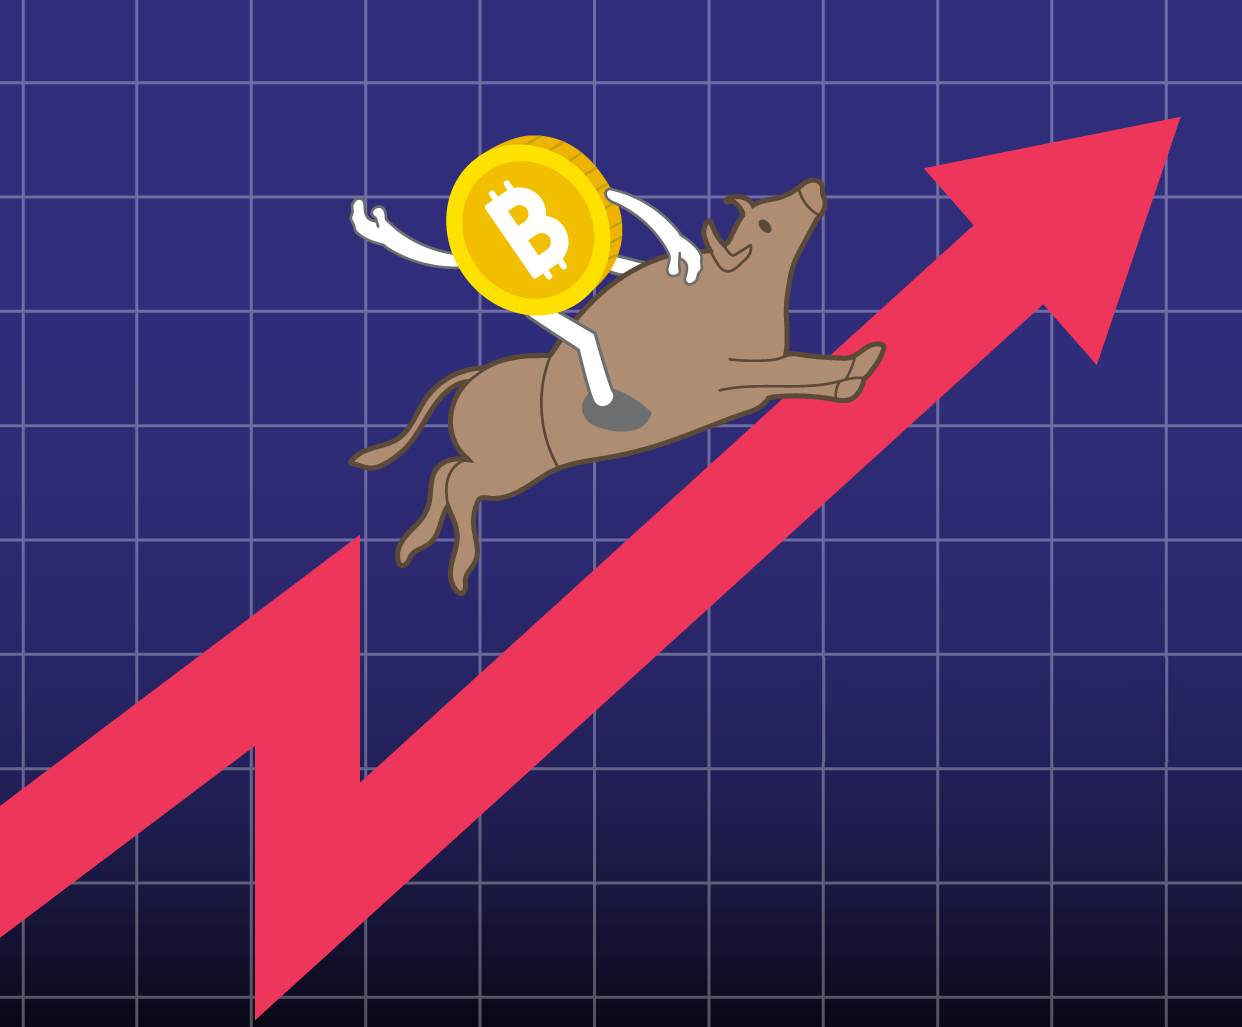 3 Things To Know Before Entering Bitcoin’s Bull Run